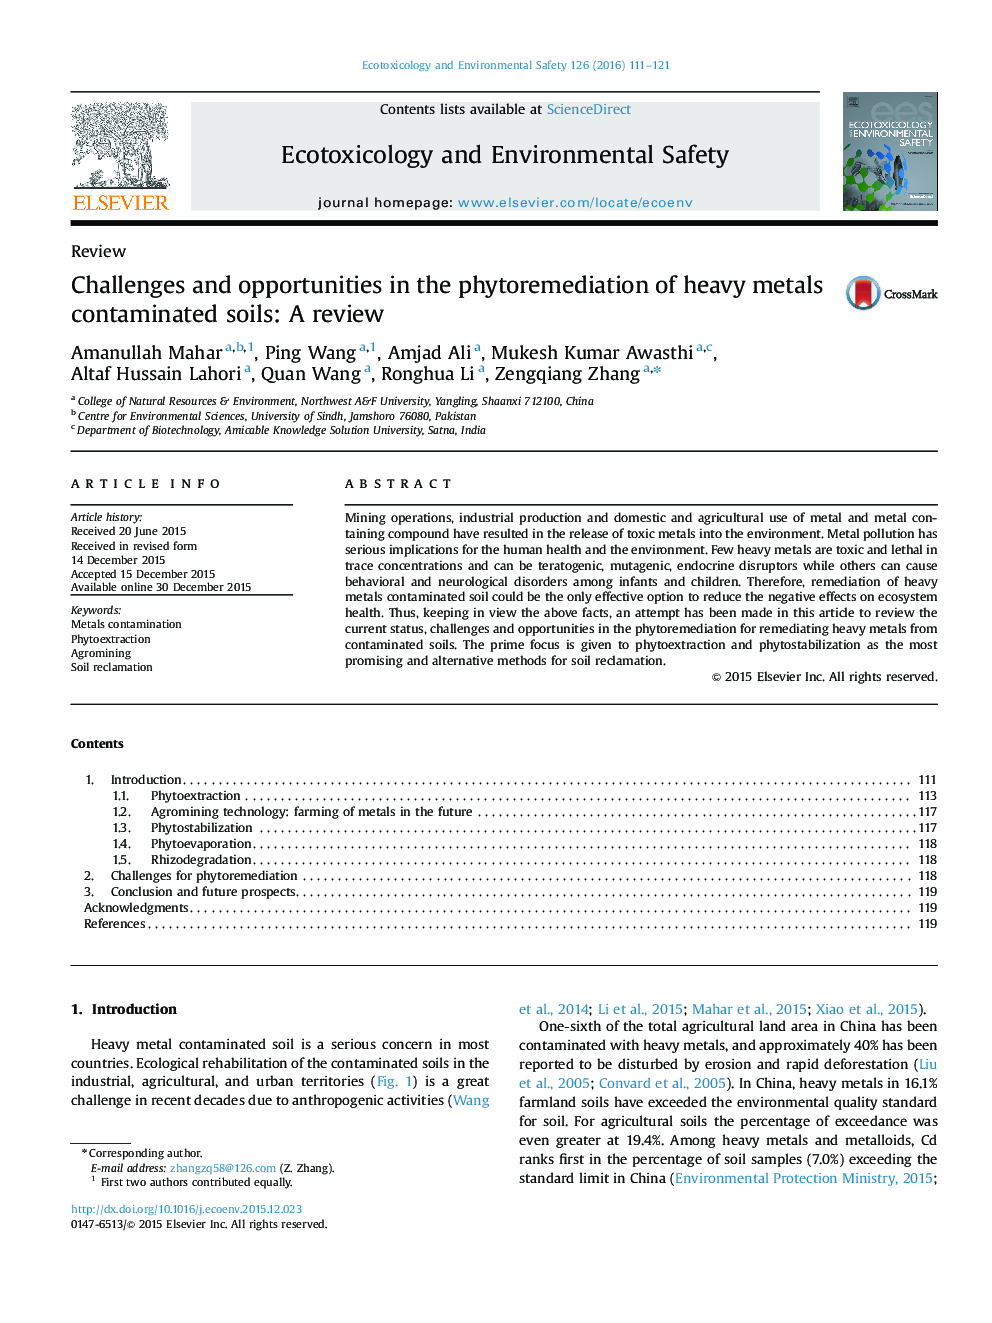 Challenges and opportunities in the phytoremediation of heavy metals contaminated soils: A review